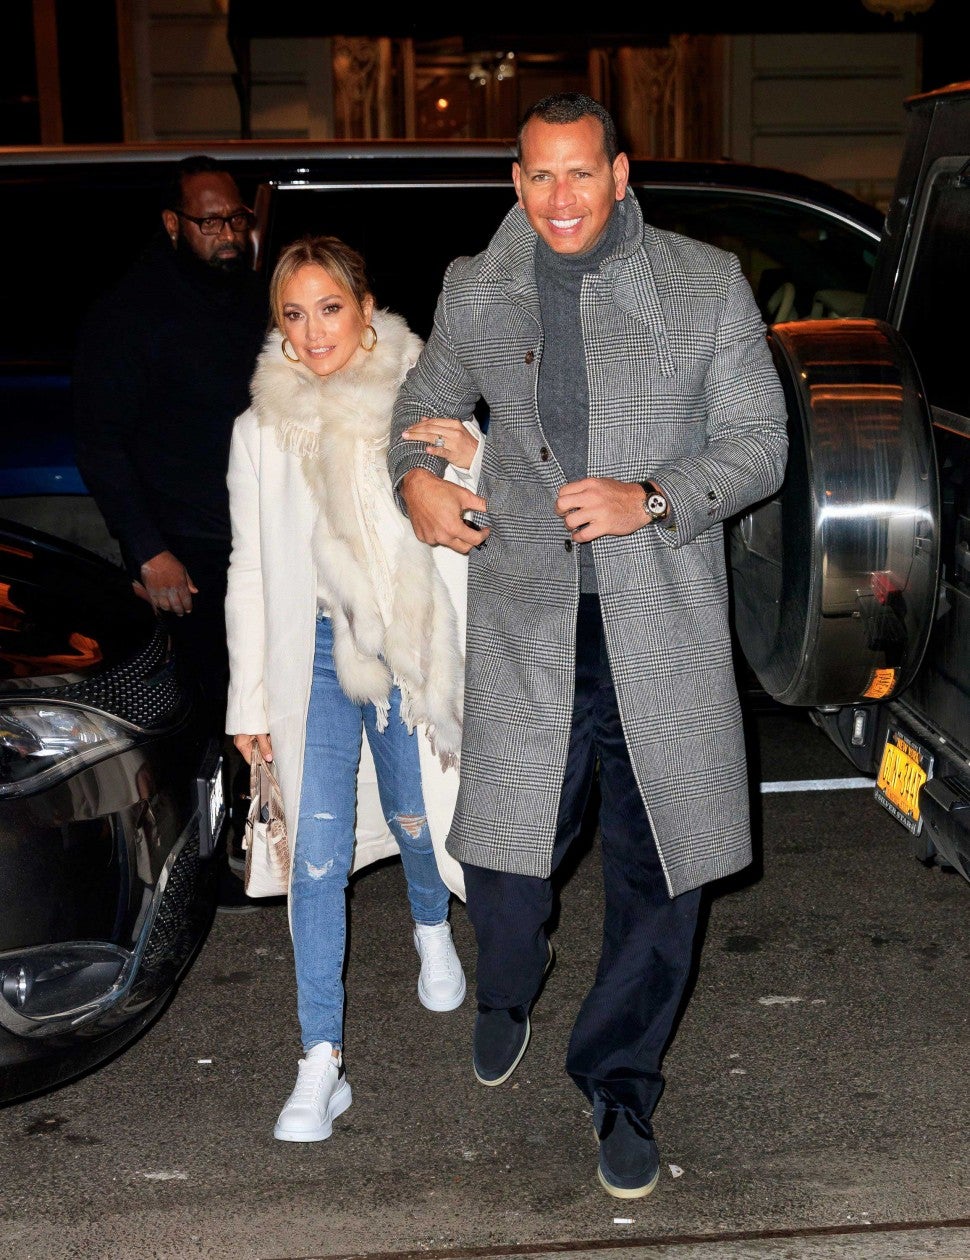 Jennifer Lopez and Alex Rodriguez in New York City on March 17